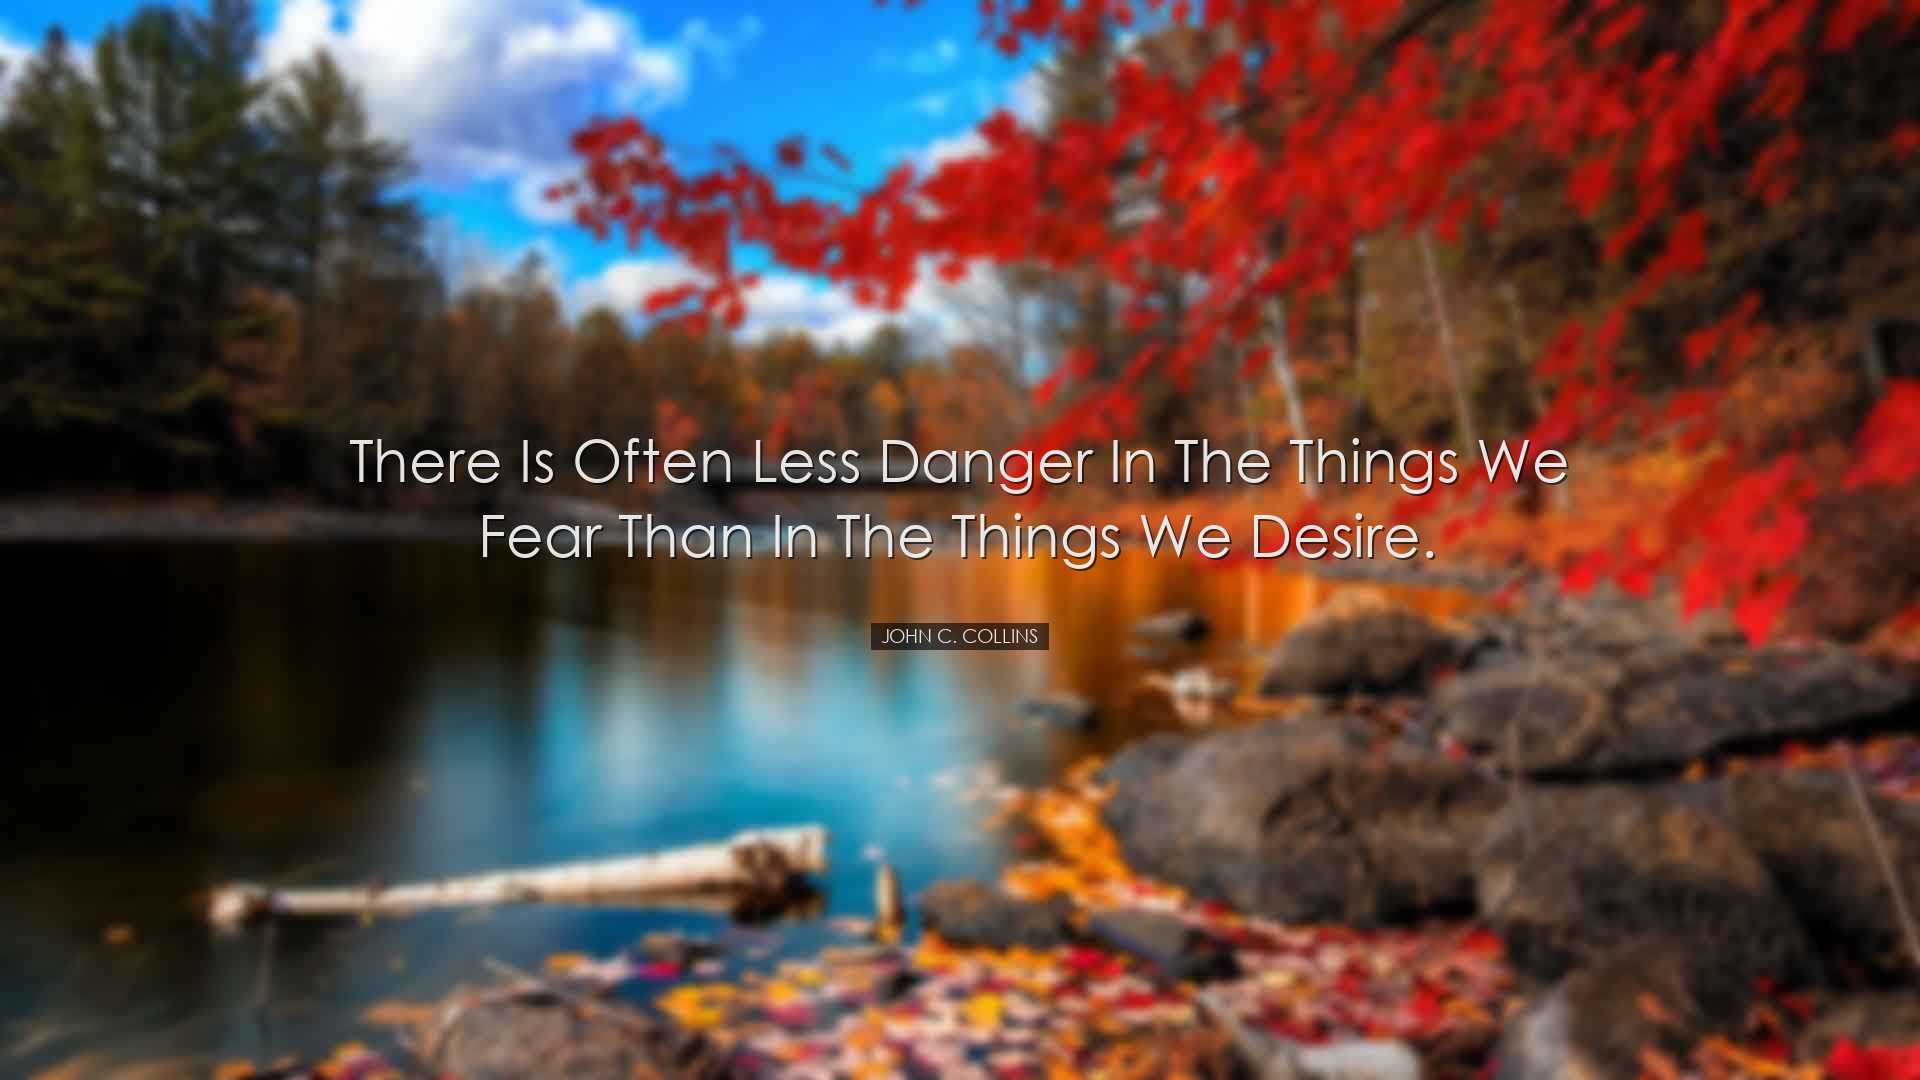 There is often less danger in the things we fear than in the thing